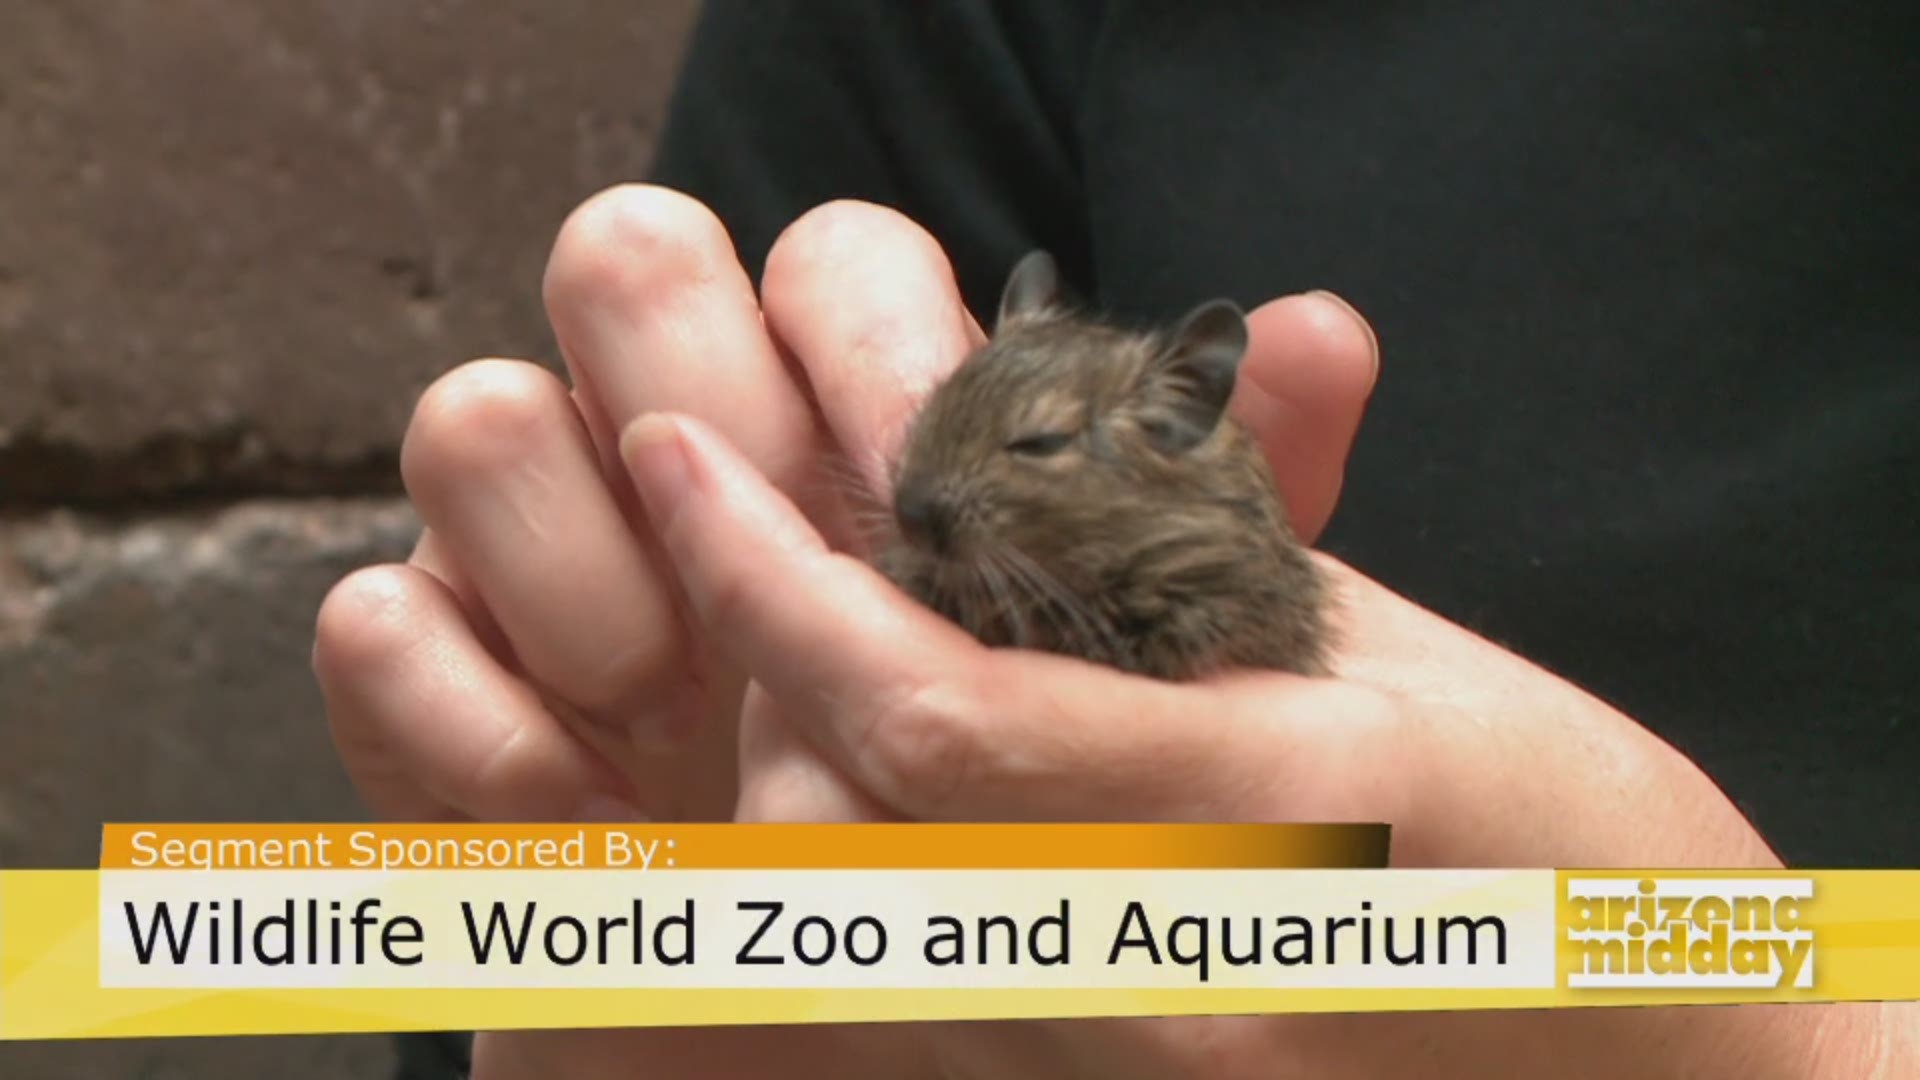 Kristy Morcom brings a baby degu to tell us about all the summer fun happenings at the Wildlife World Zoo, Aquarium & Safari.